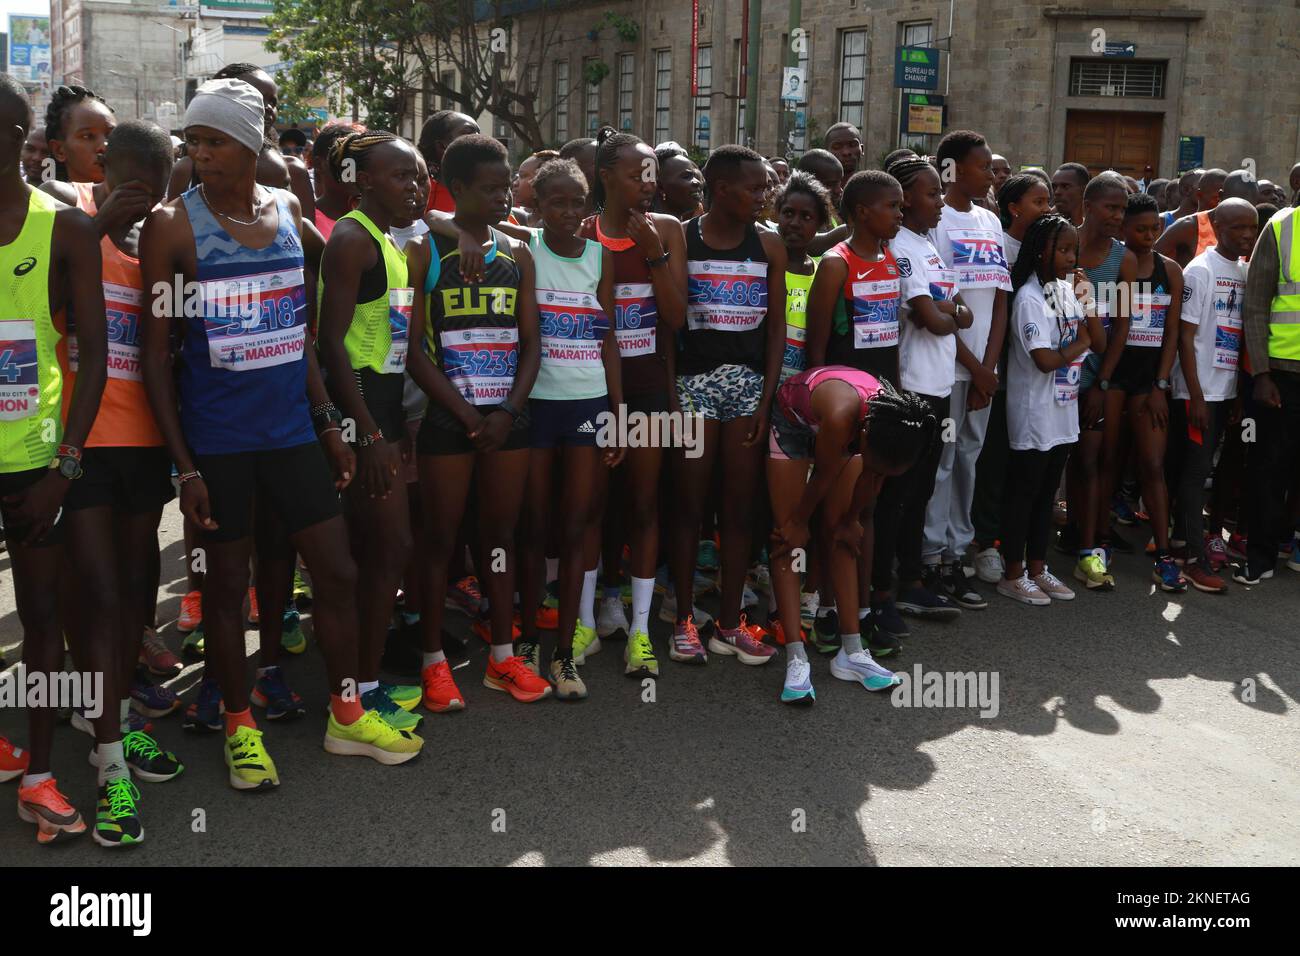 Nakuru, Kenya. 27th Nov, 2022. Athletes wait to start competing during the Stanbic Nakuru City Marathon held in Nakuru. This was the second annual marathon to be sponsored by the Stanbic Bank and Nakuru County Government, it consisted of 21km, 15km and 5km races. Credit: SOPA Images Limited/Alamy Live News Stock Photo